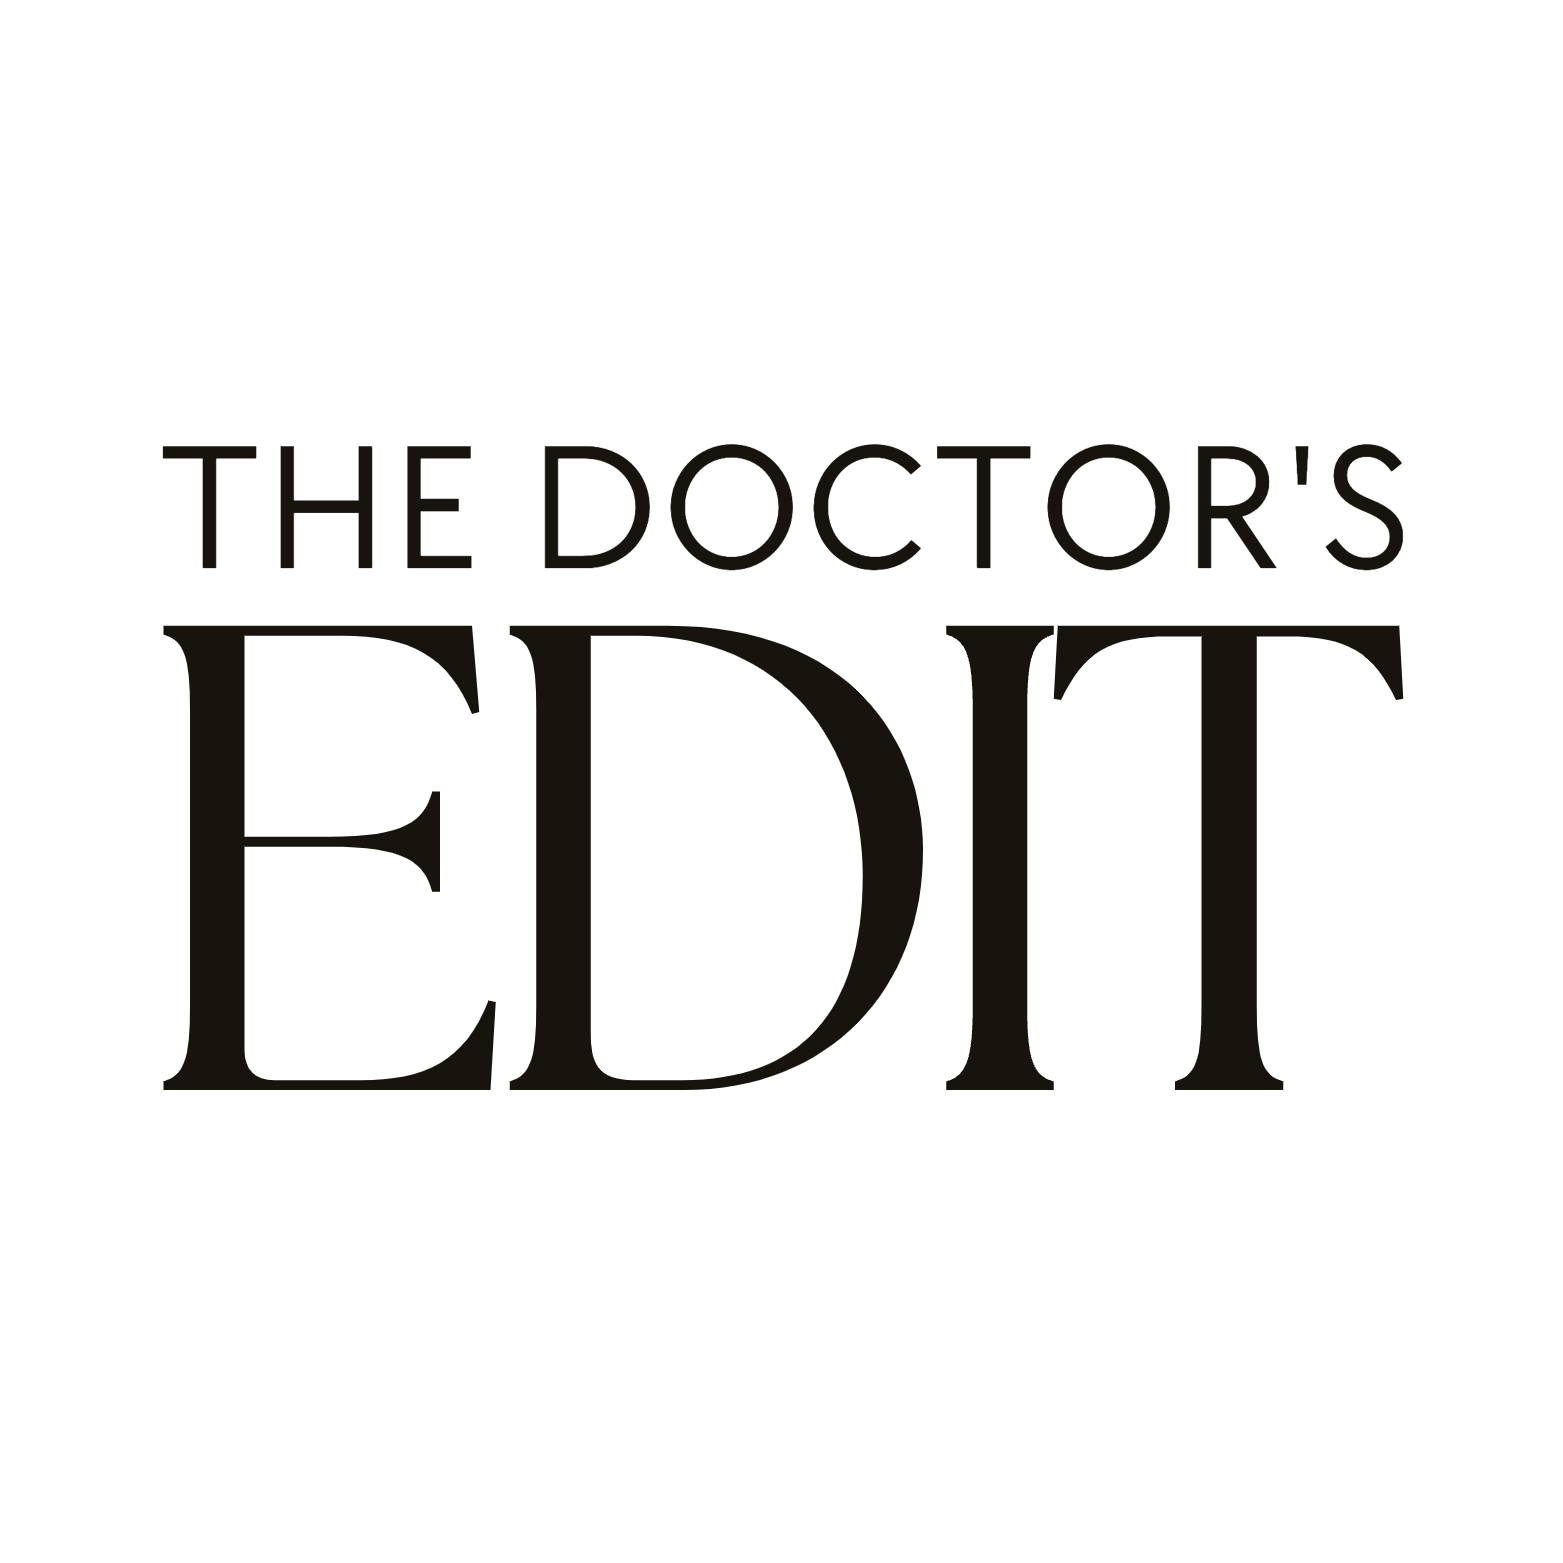 The Doctor's Edit